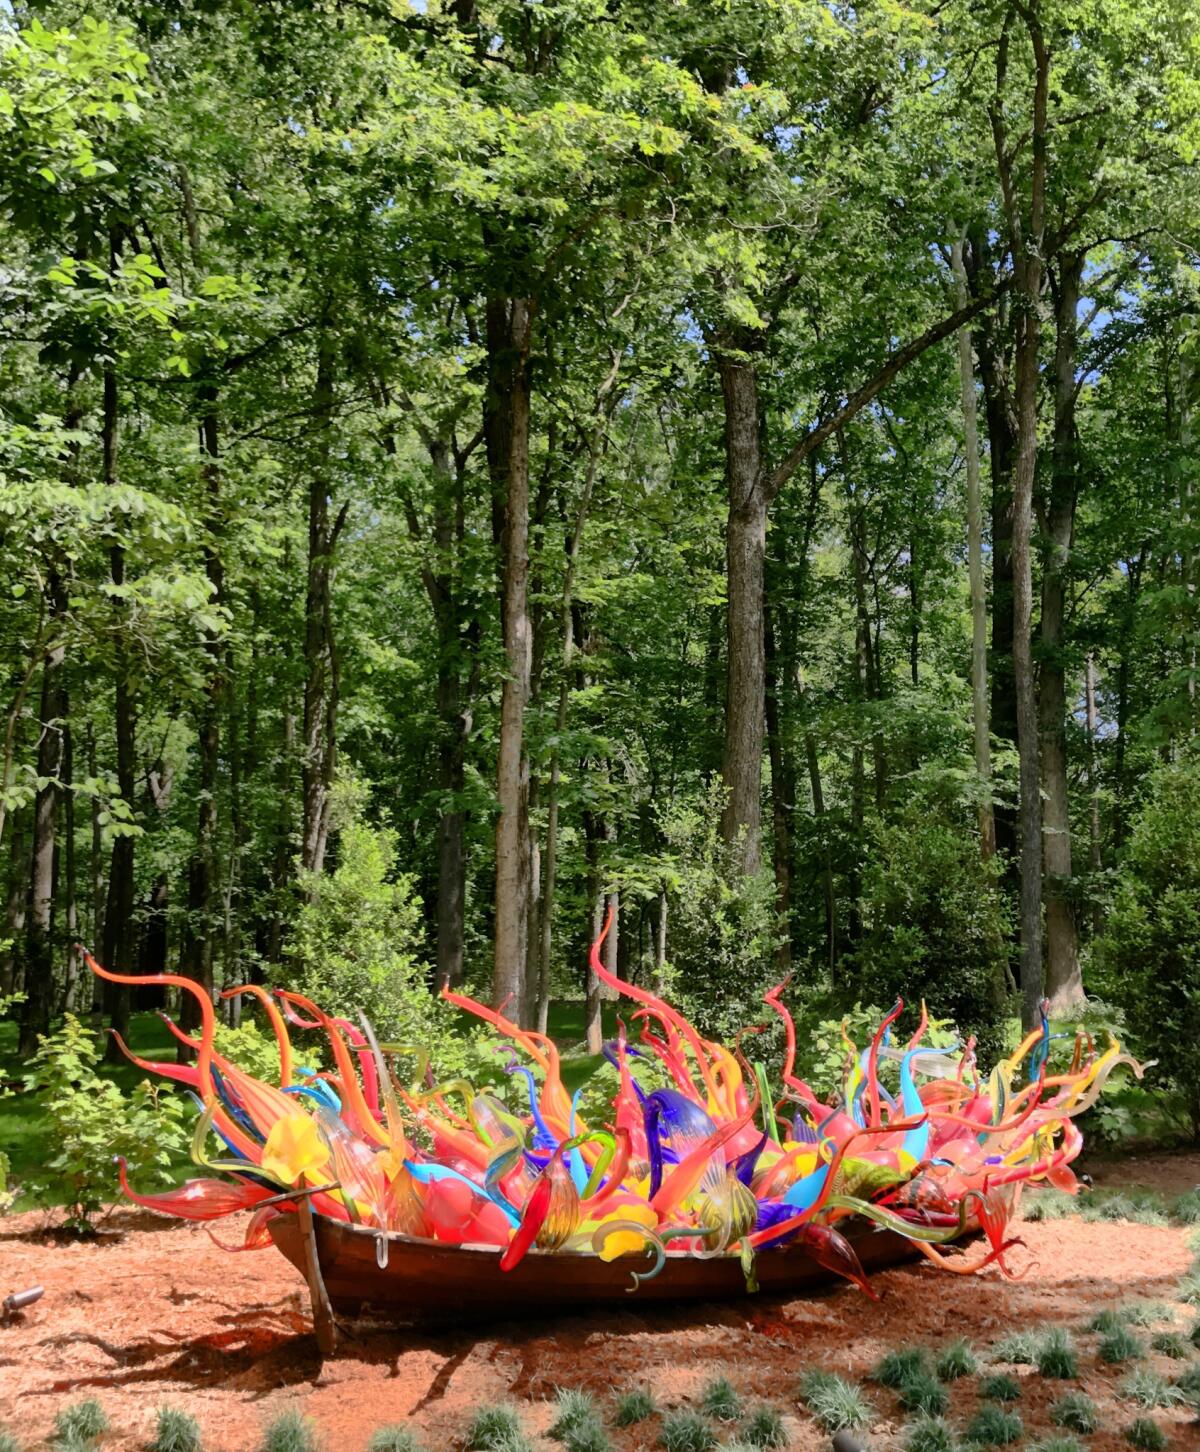 Dale Chihuly's old wooden rowboat is filled with glass-blown forms to create "Fiori Boat," part of the Chihuly in the Forest outdoor exhibition at Crystal Bridges Museum of American Art. (Cynthia Mines)